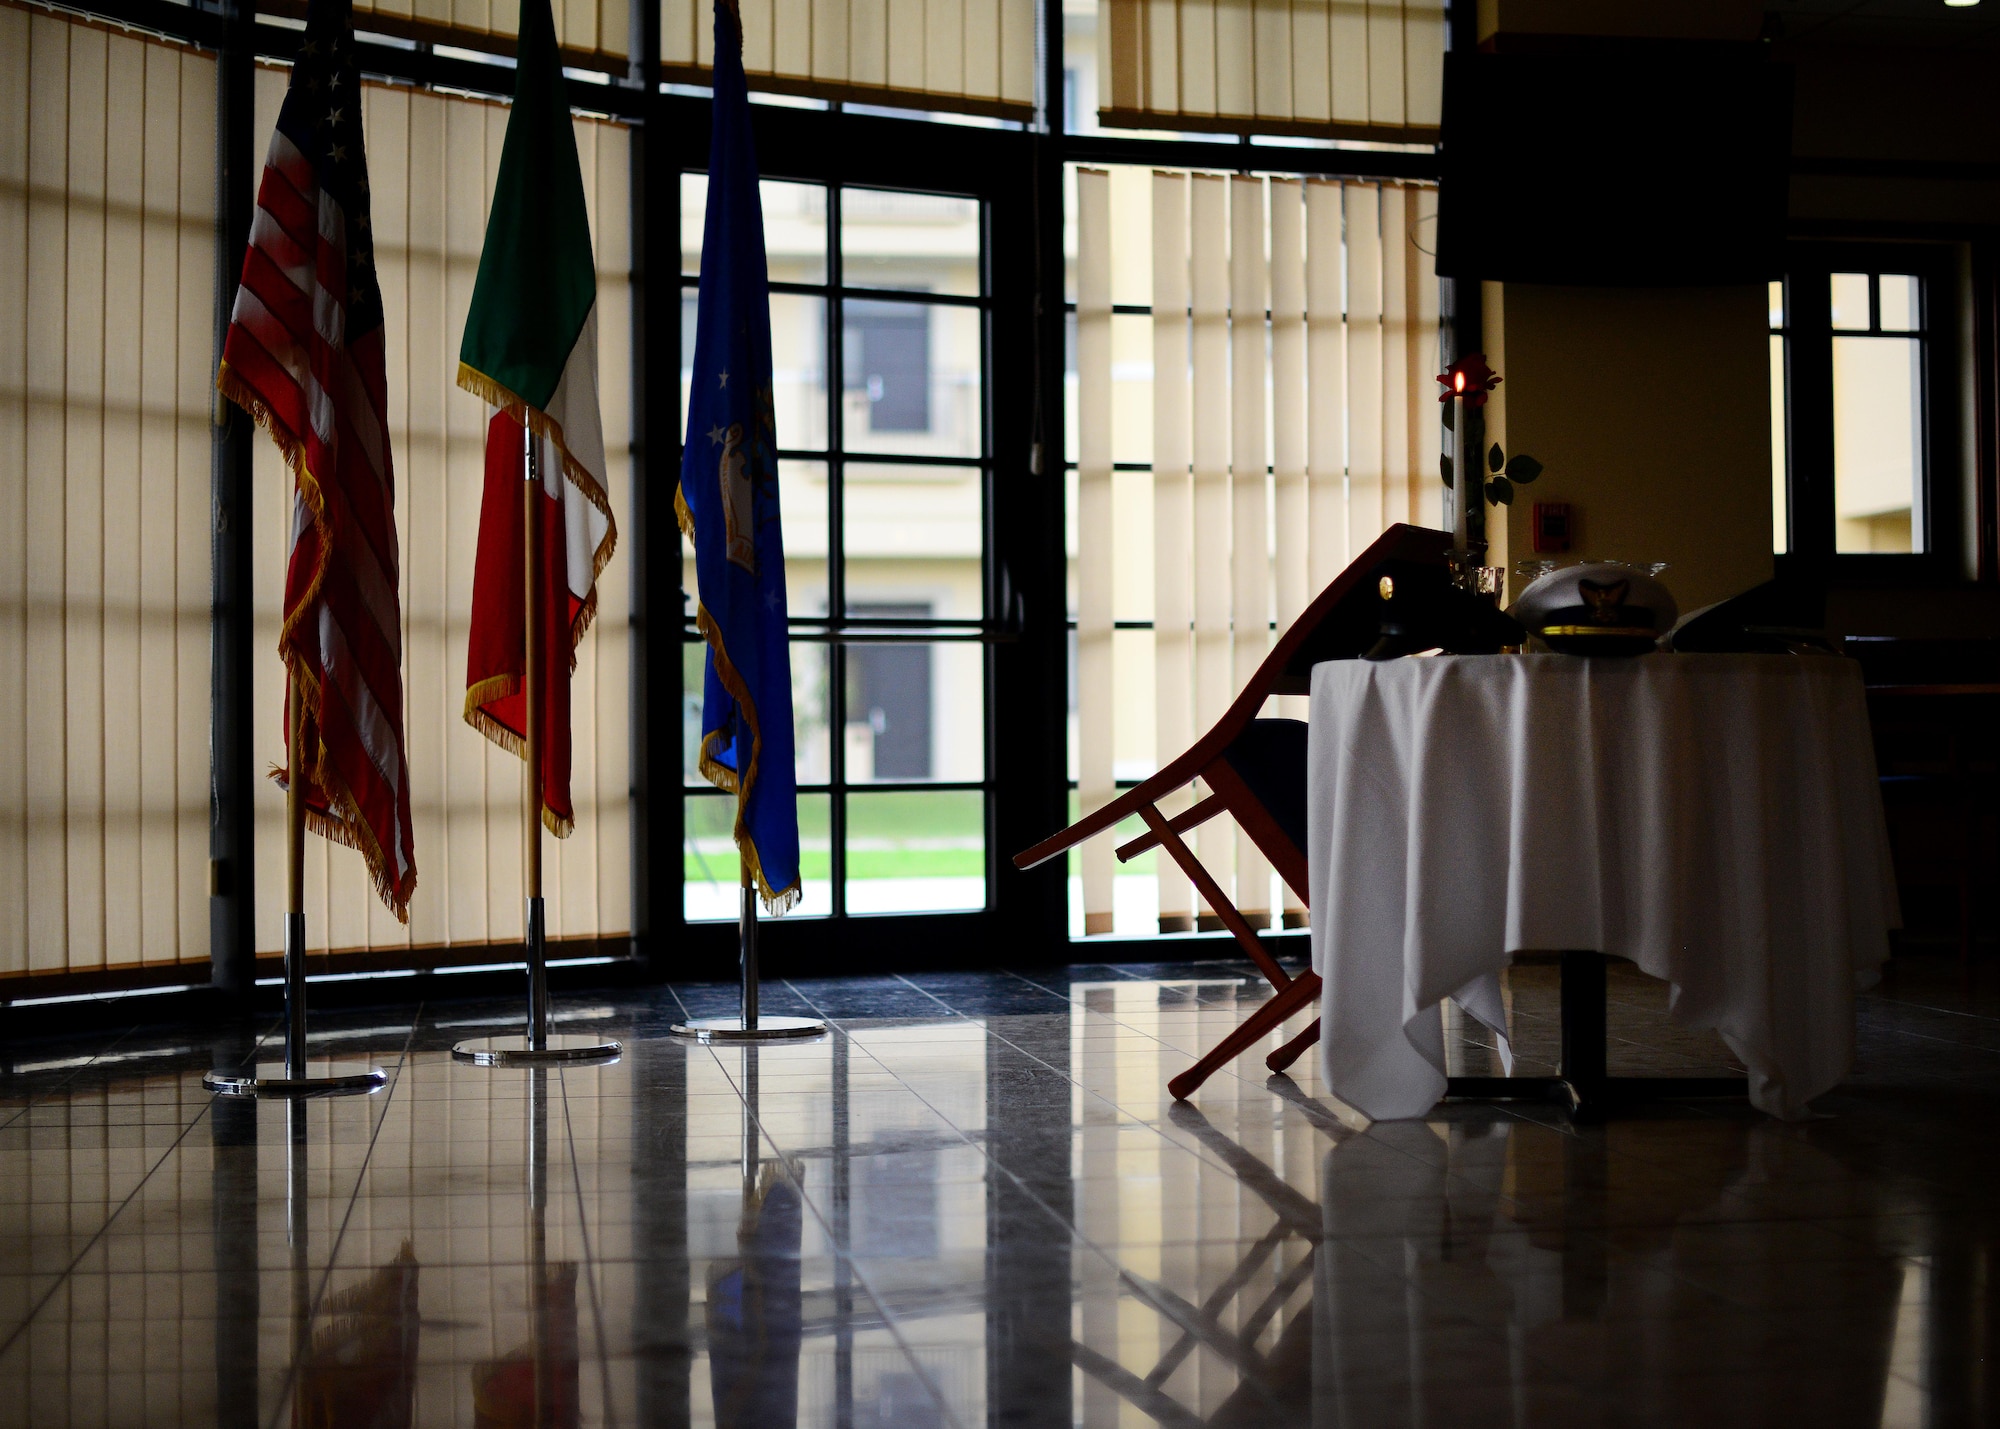 The Missing Man Table is displayed in honor of prisoners of war and those missing in action, Sept. 15, 2015, at Aviano Air Base, Italy. According to the Defense POW/MIA Accounting Agency, there are still 83,114 service members, since World War II, who are unaccounted for. (U.S. Air Force photo by Staff Sgt. Evelyn Chavez/Released)